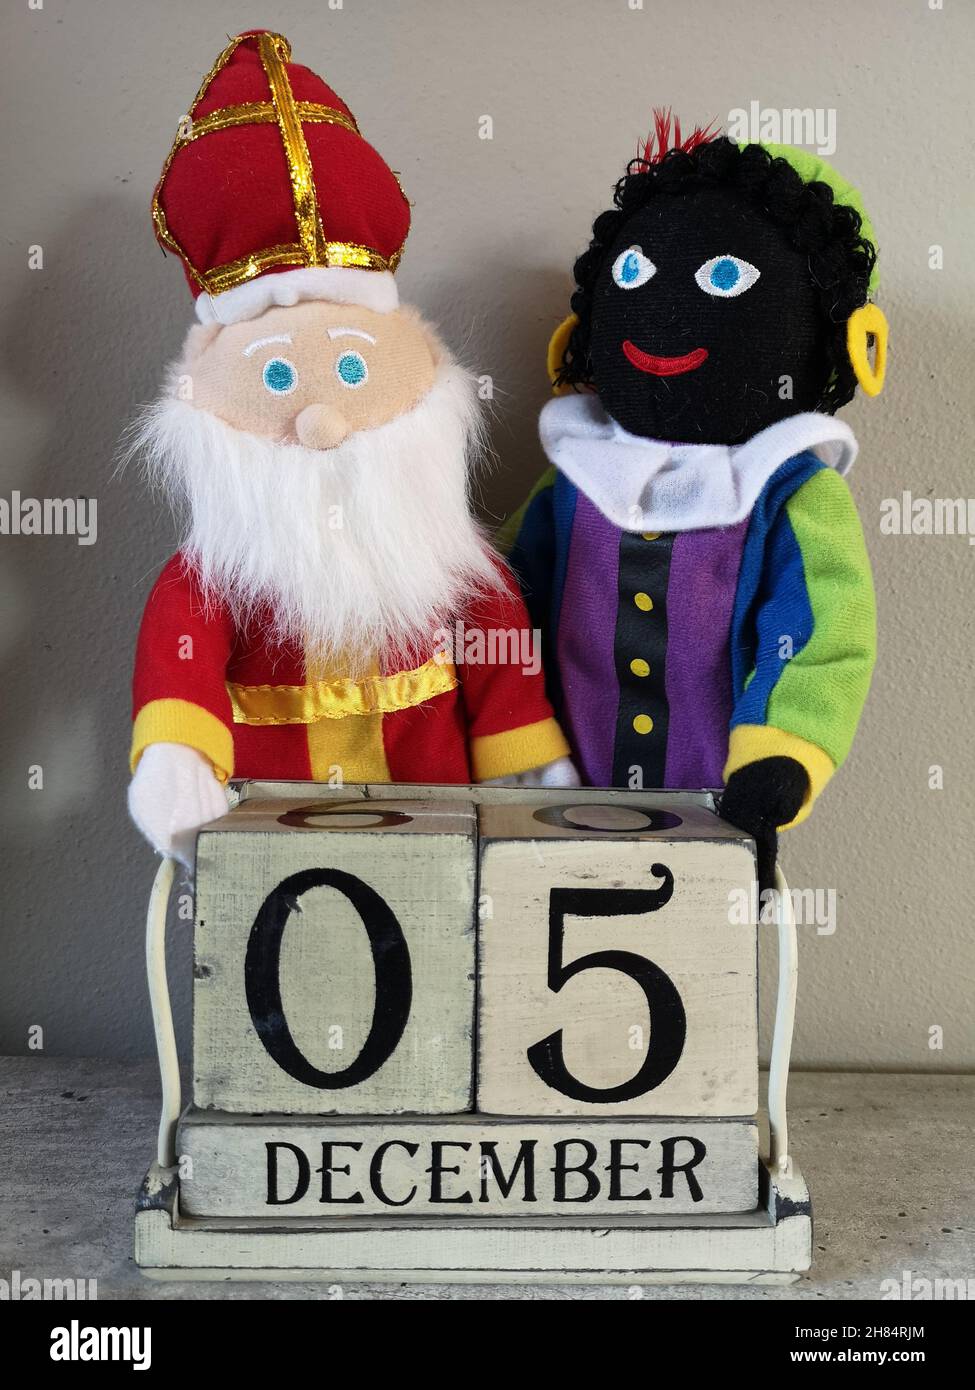 Decoration for Sinterklaas party. 5th december. Stock Photo